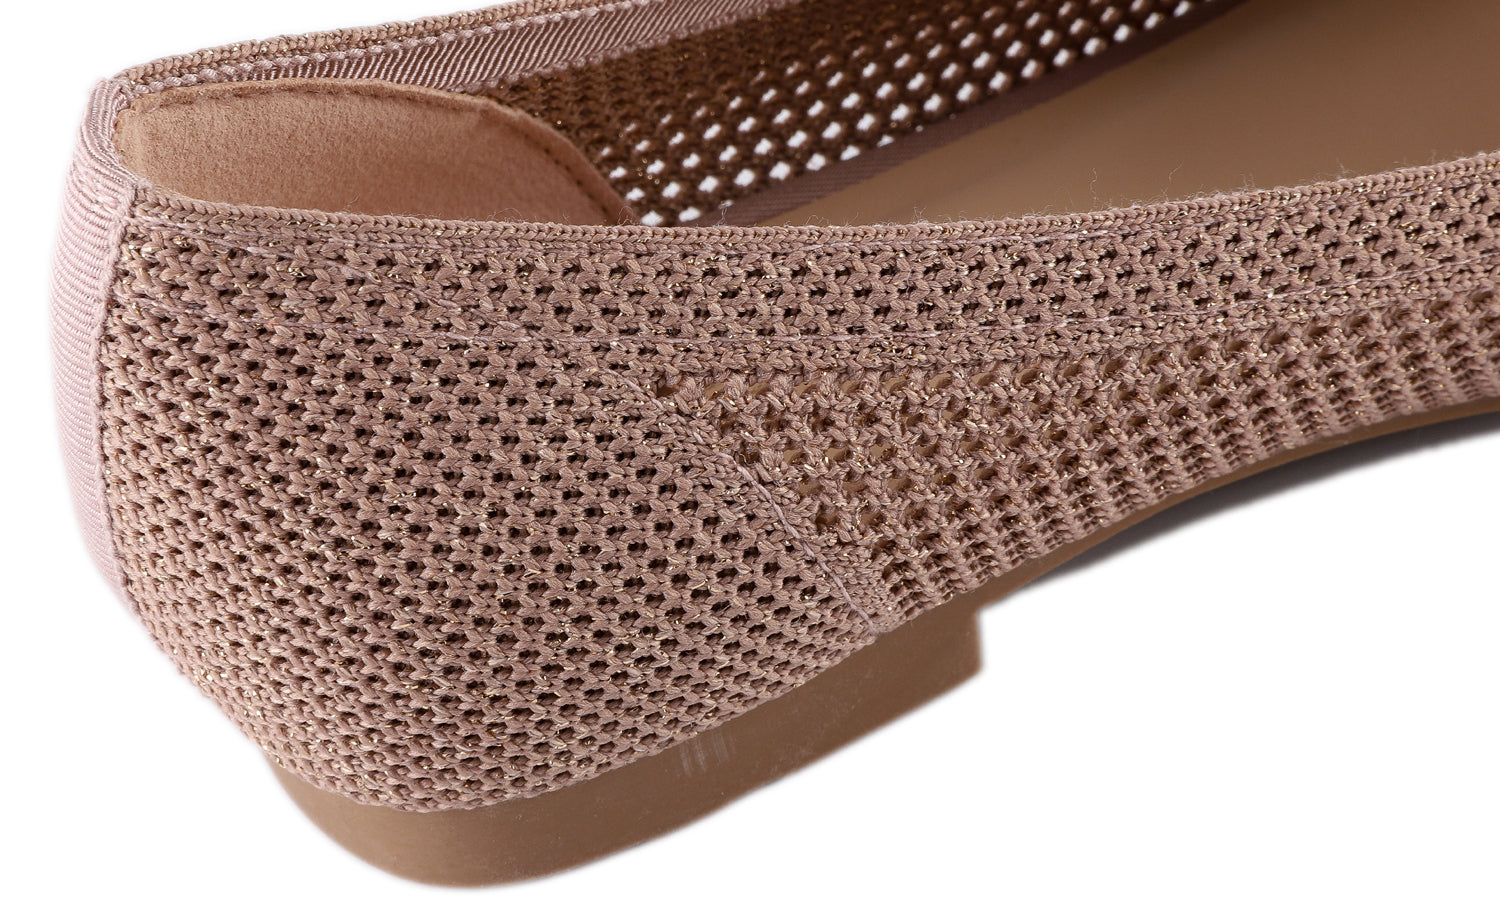 Feversole Women's Woven Fashion Breathable Knit Flat Shoes Rose Gold Loafer